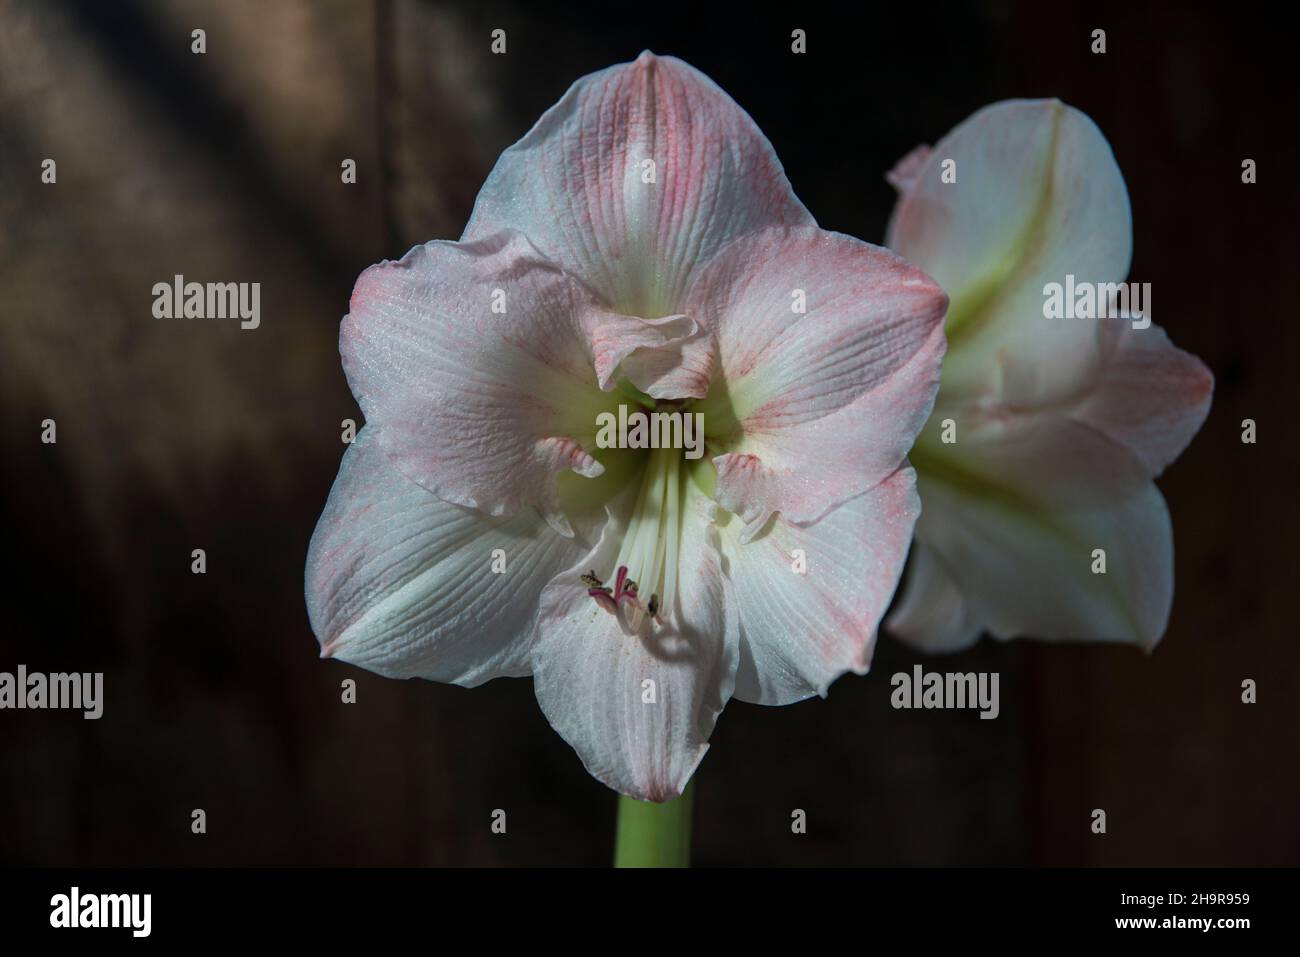 Amaryllis bloom in winter at christmas time. Stock Photo